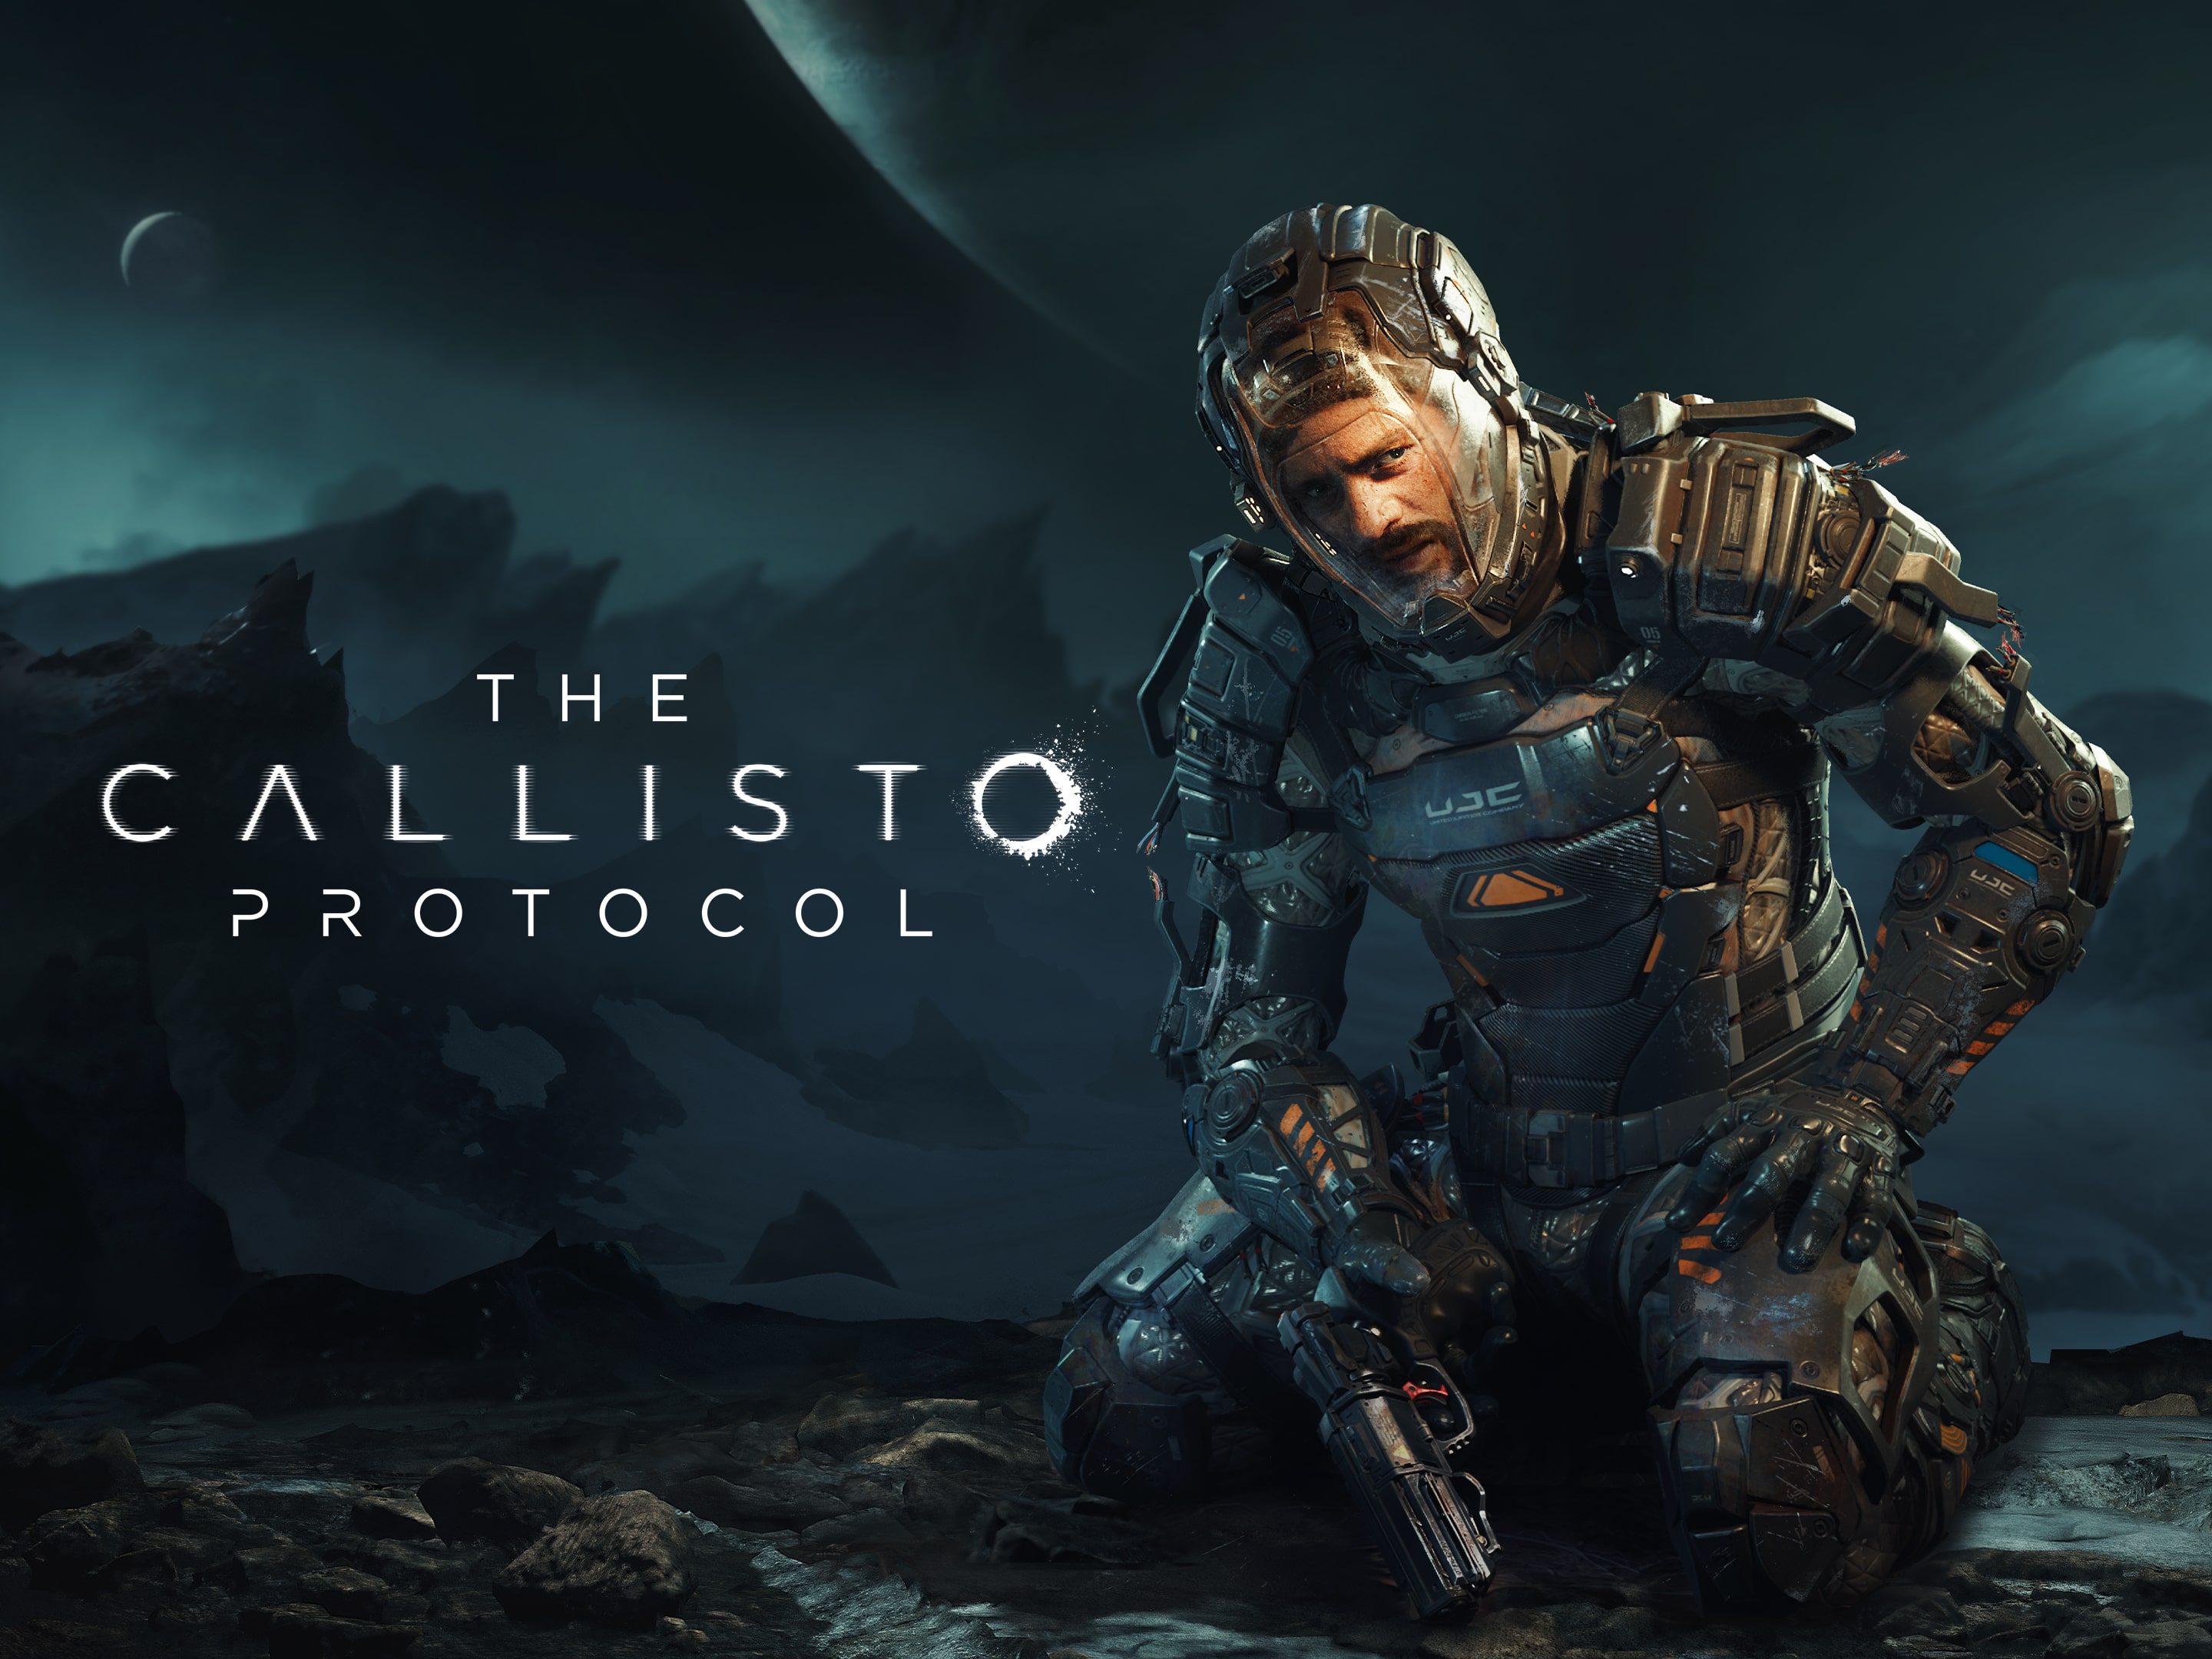 tit positur penge The Callisto Protocol - PS4 & PS5 Games | PlayStation (US)